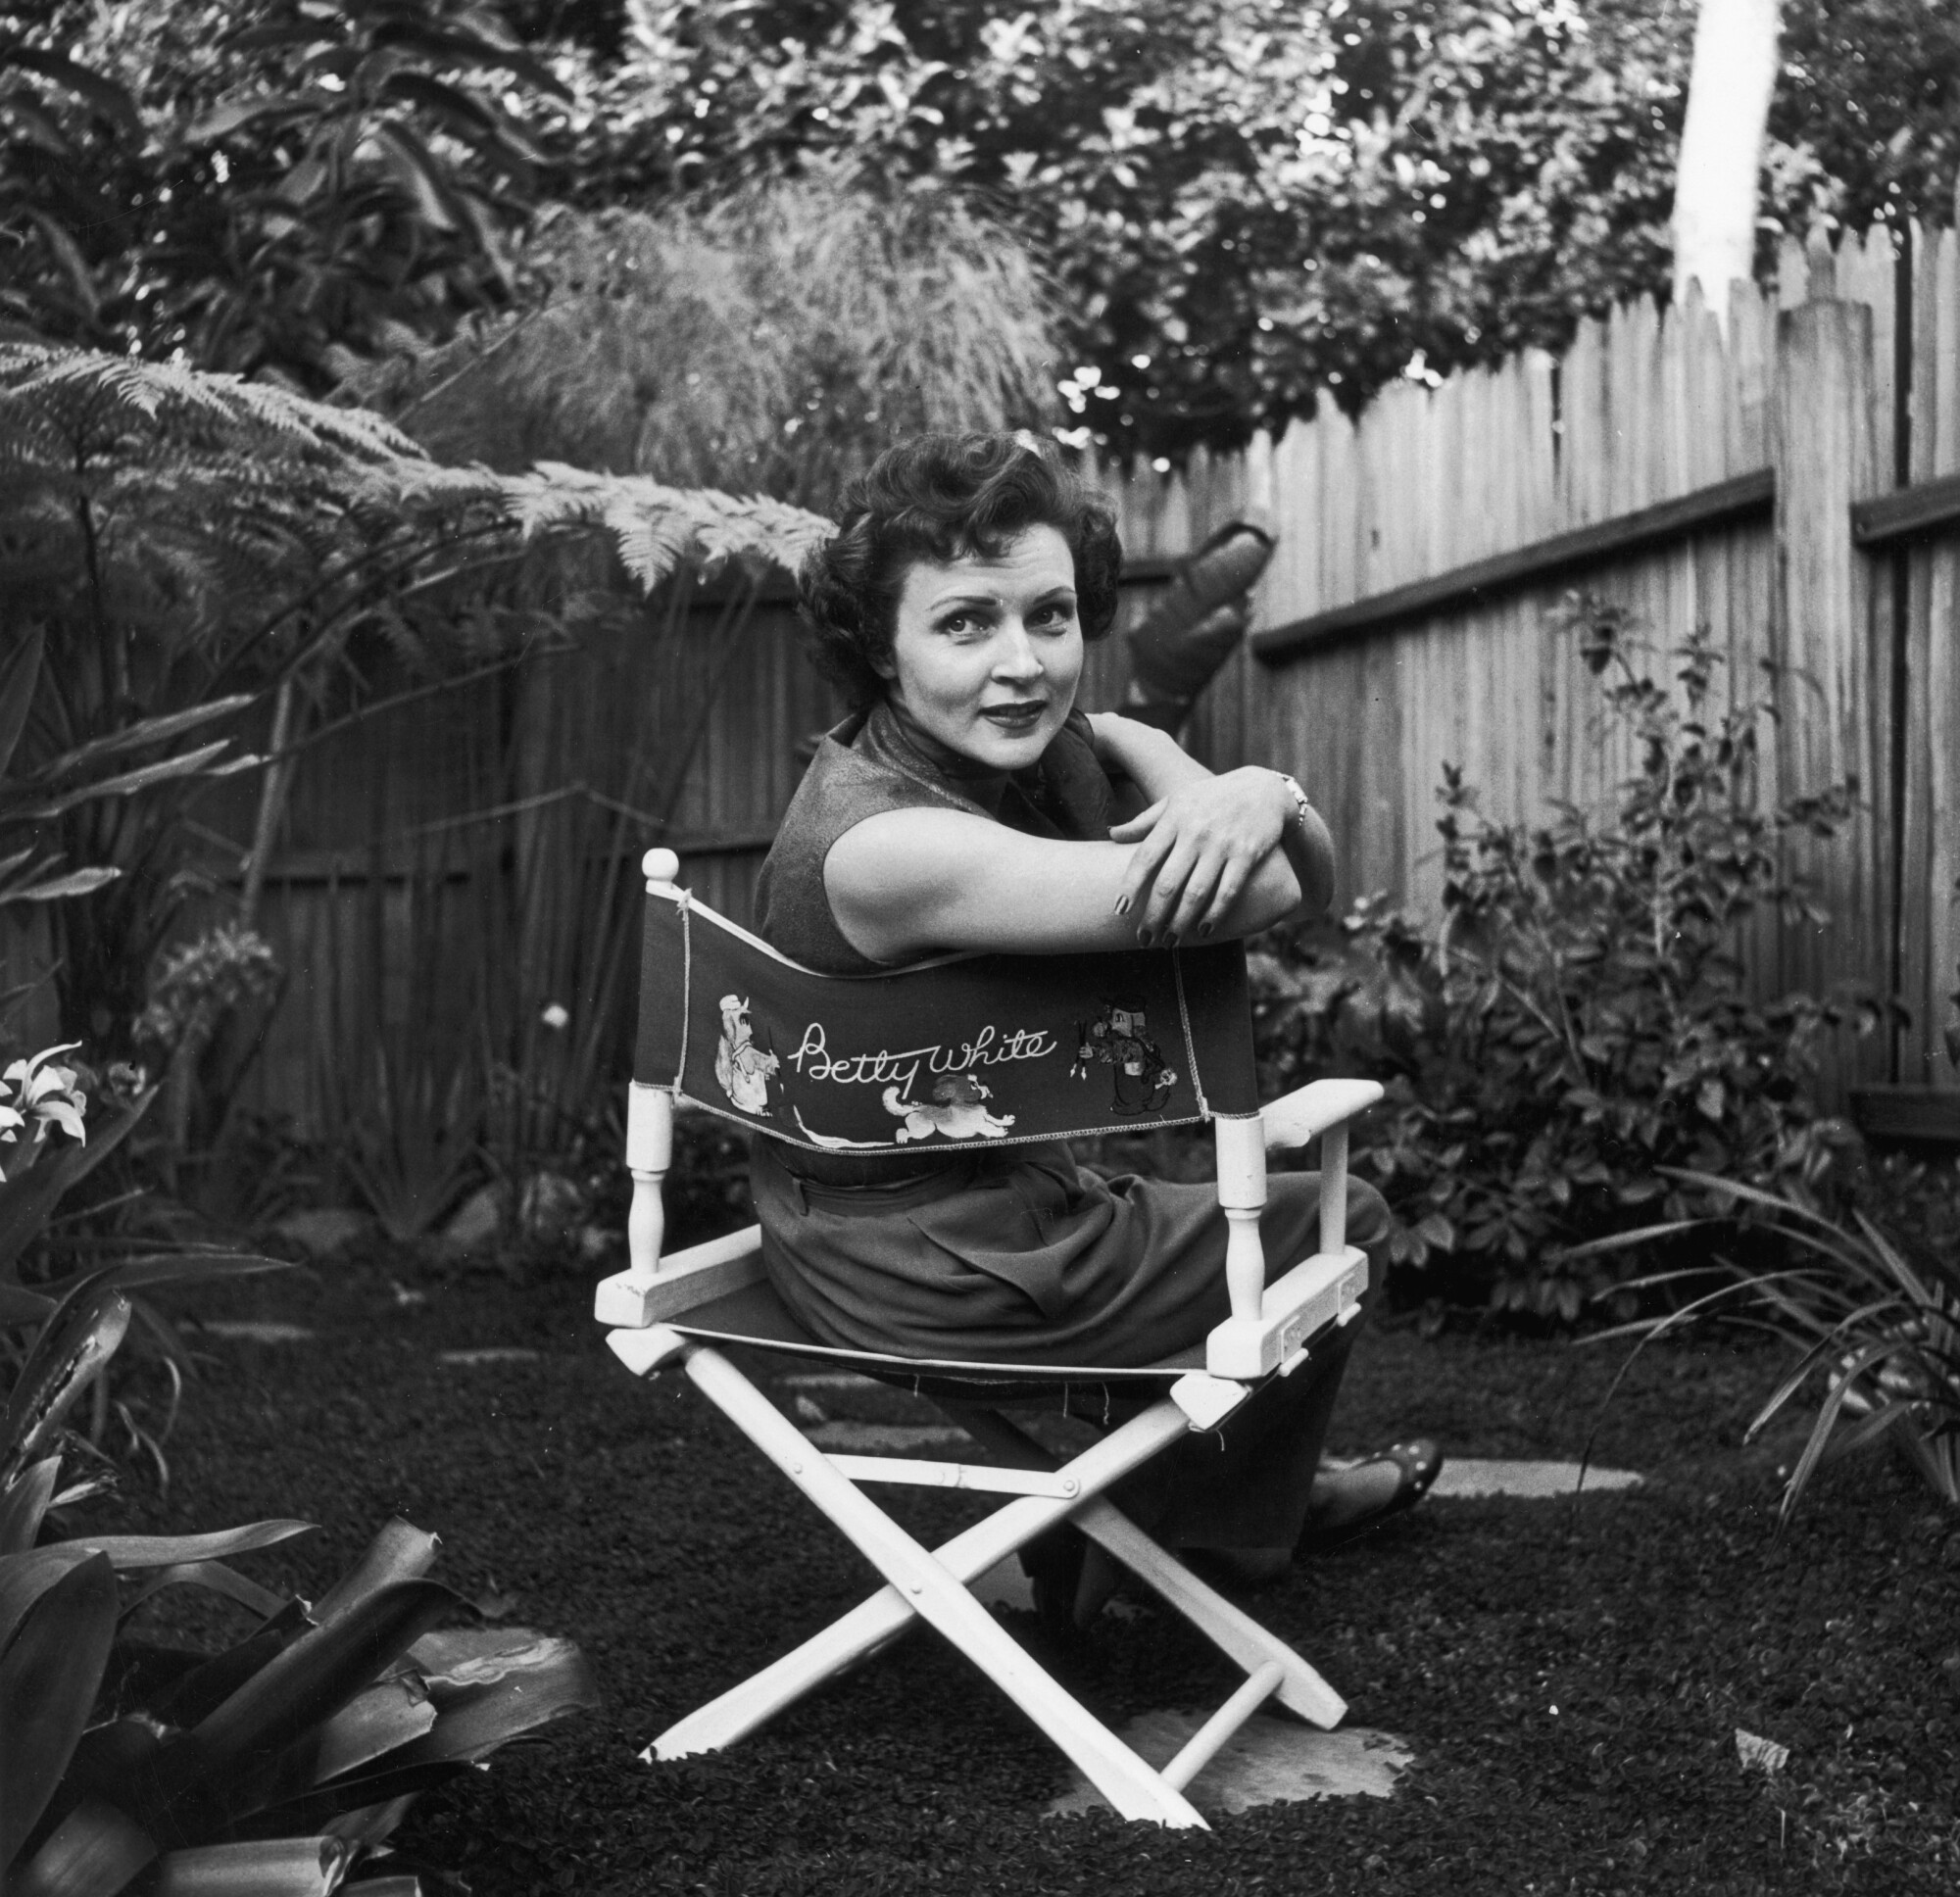 Actress Betty White sits in a canvas chair with her name on it, looking over her shoulder.